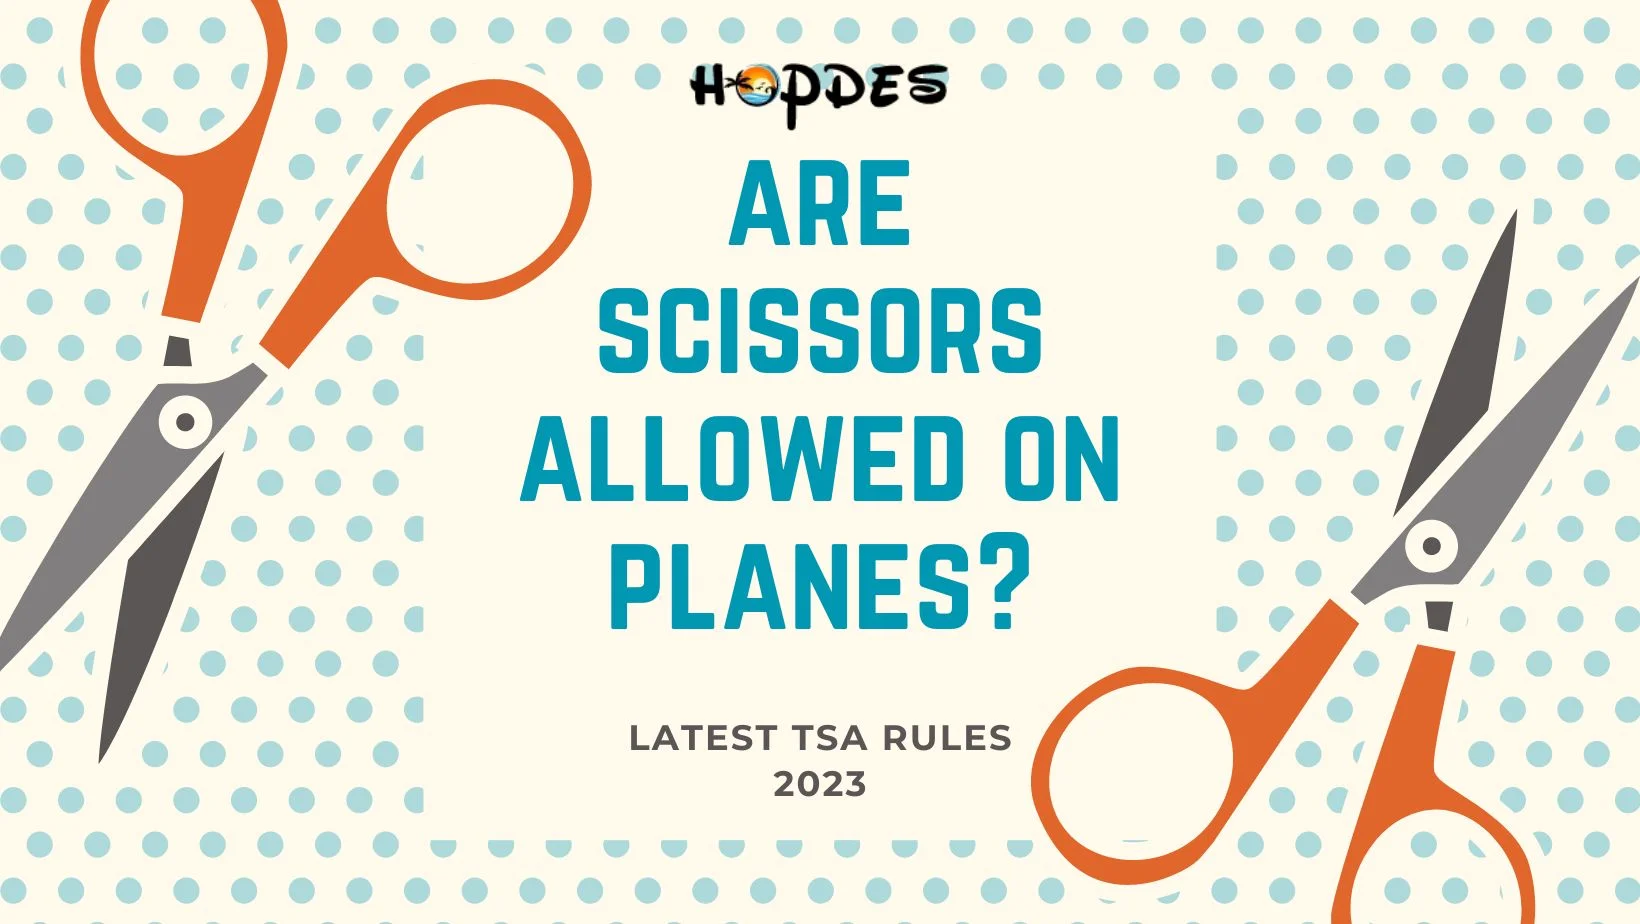 Are Scissors Allowed on Planes?